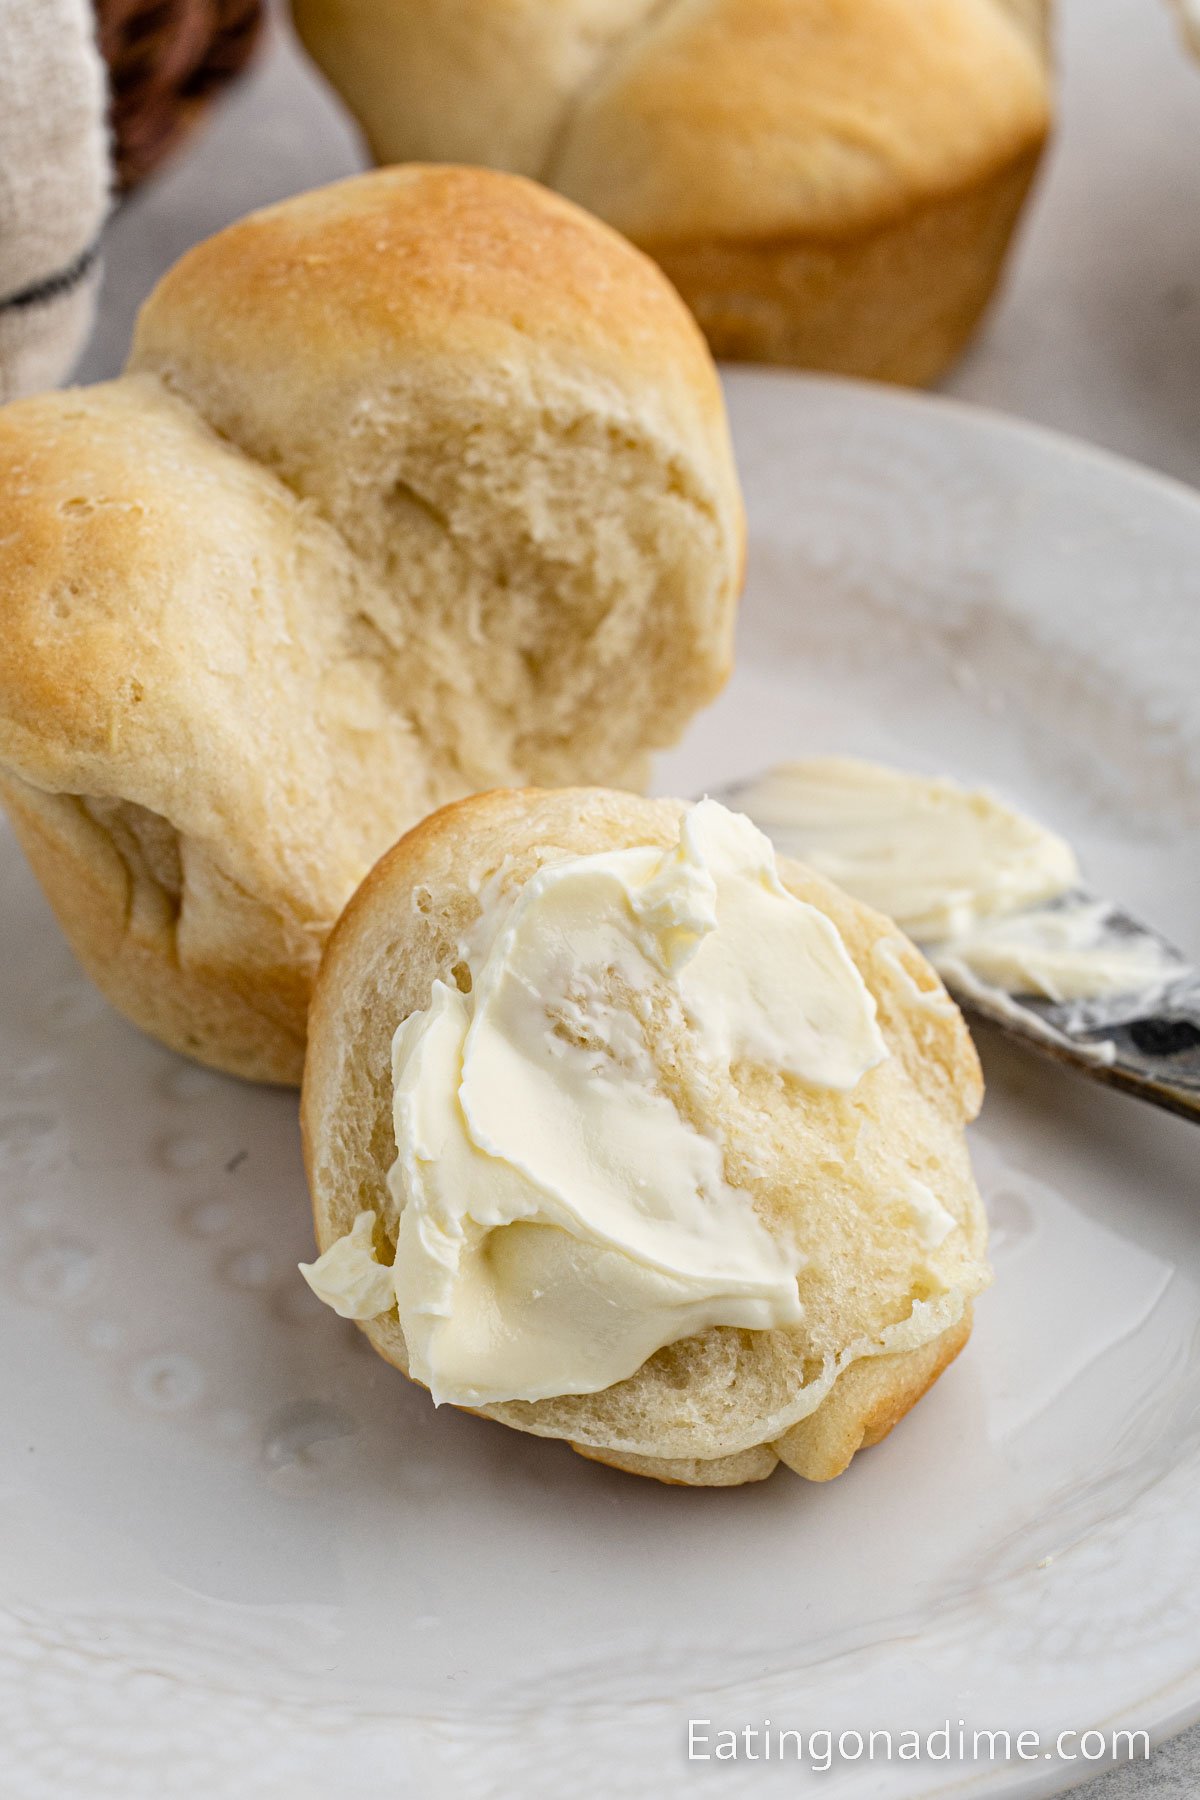 Topping the homemade rolls with butter on a plate